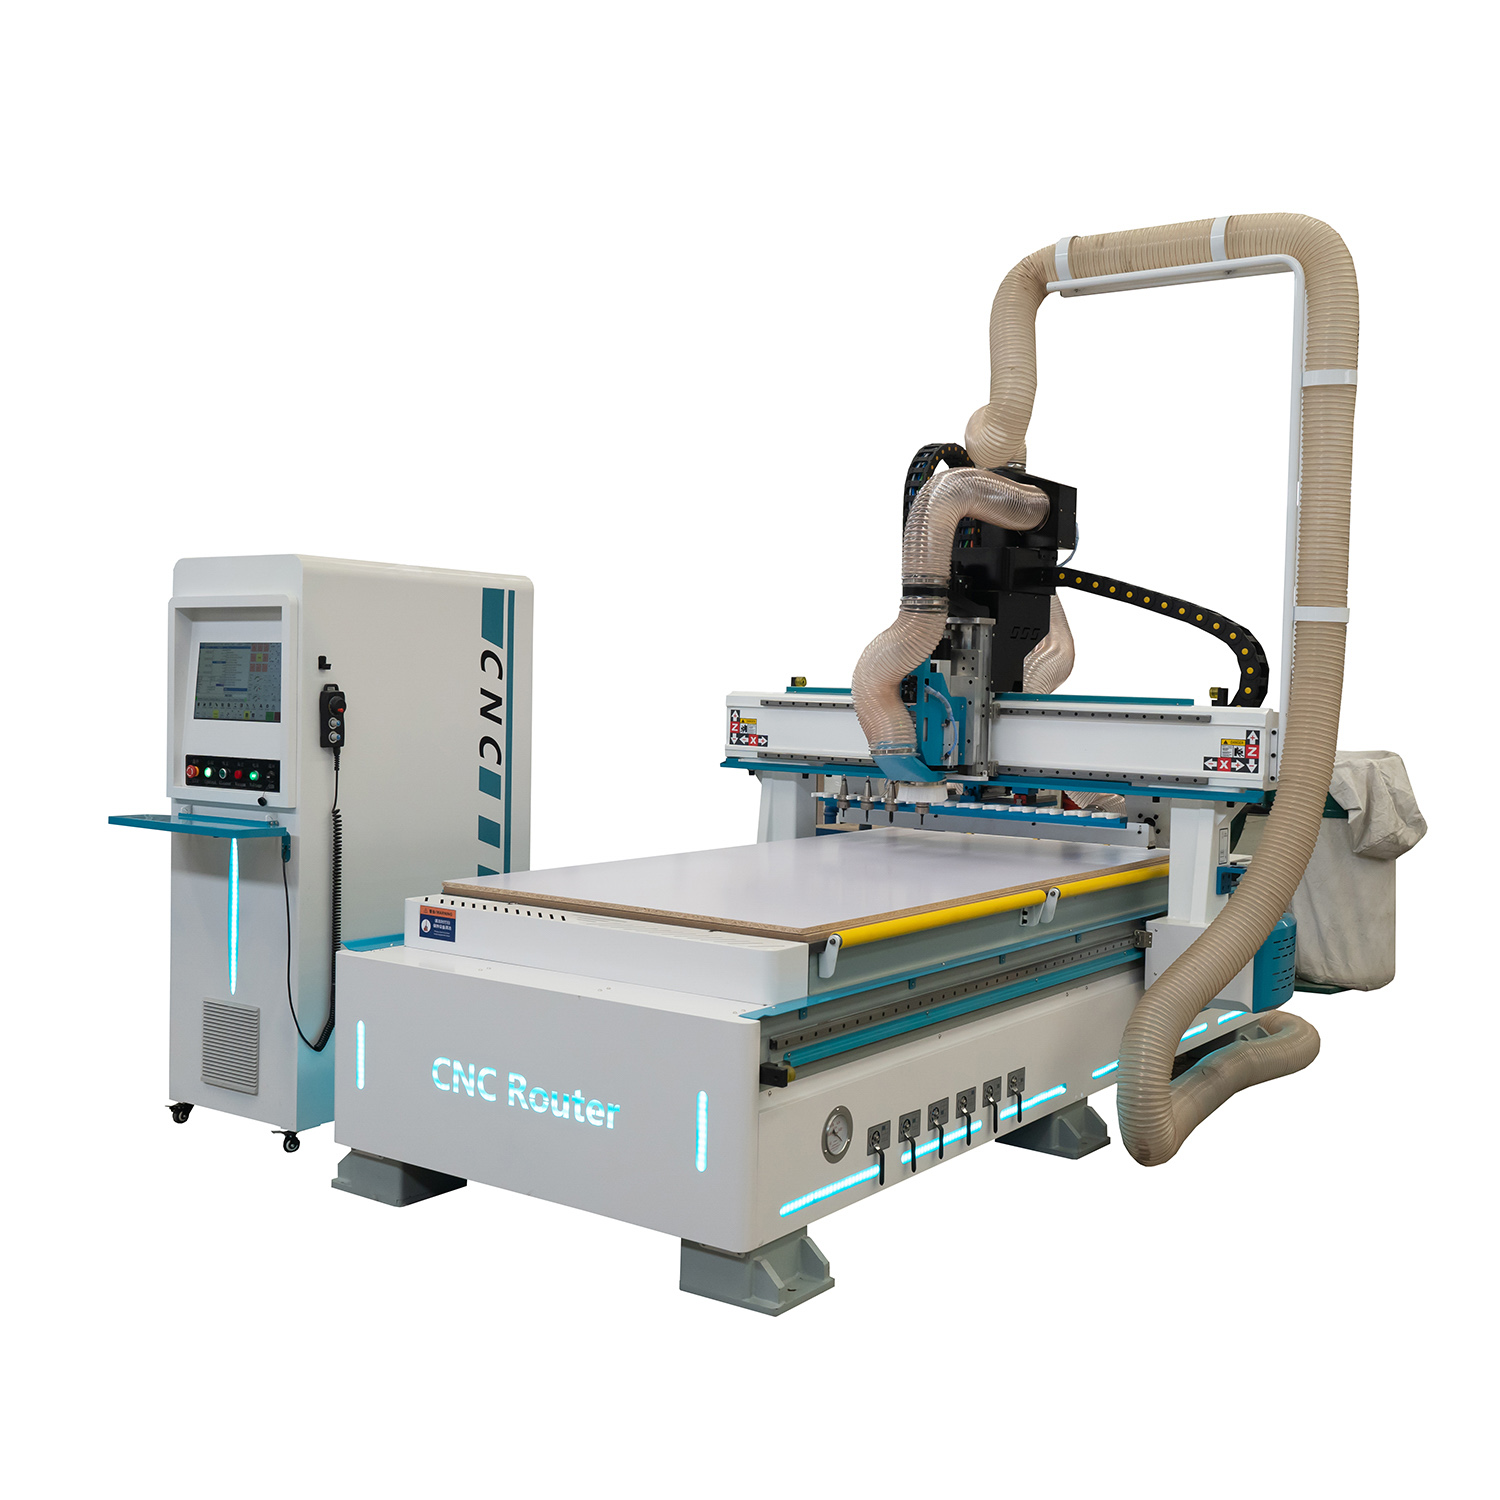 Powerful,Highly Versatile Automatic Tool Change CNC Router Featured Image